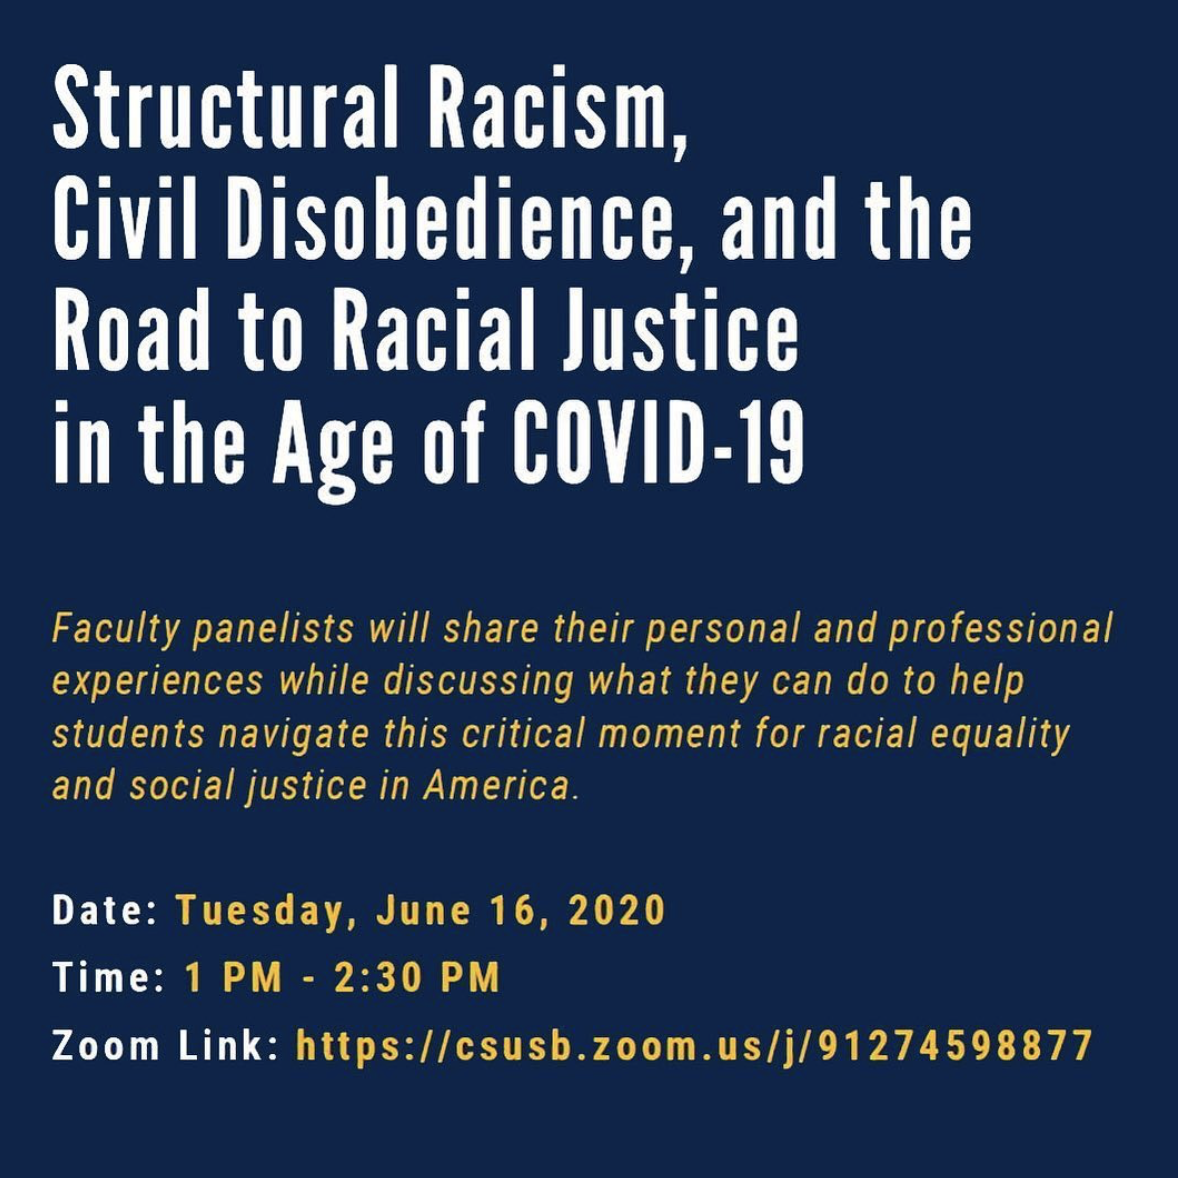 Structural Racism and Civil Disobedience